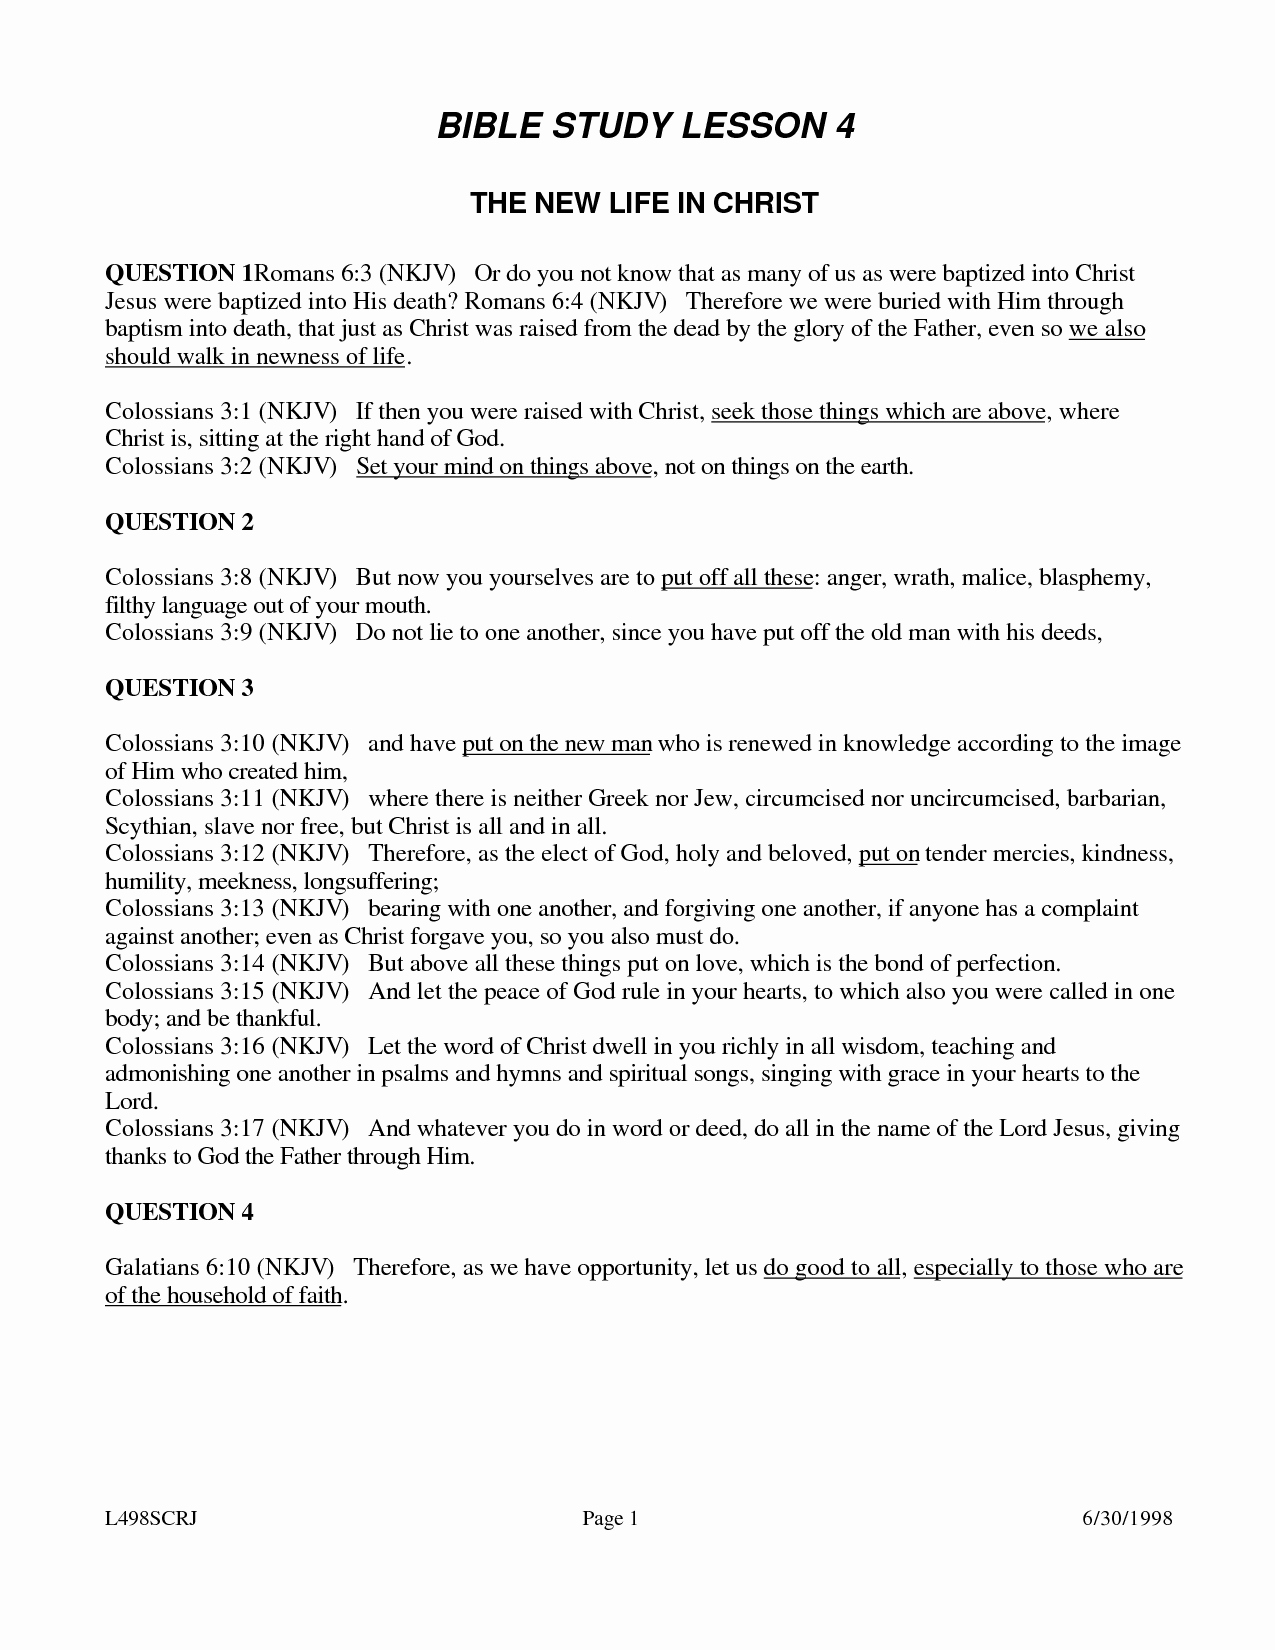 Bible lesson worksheets for adults